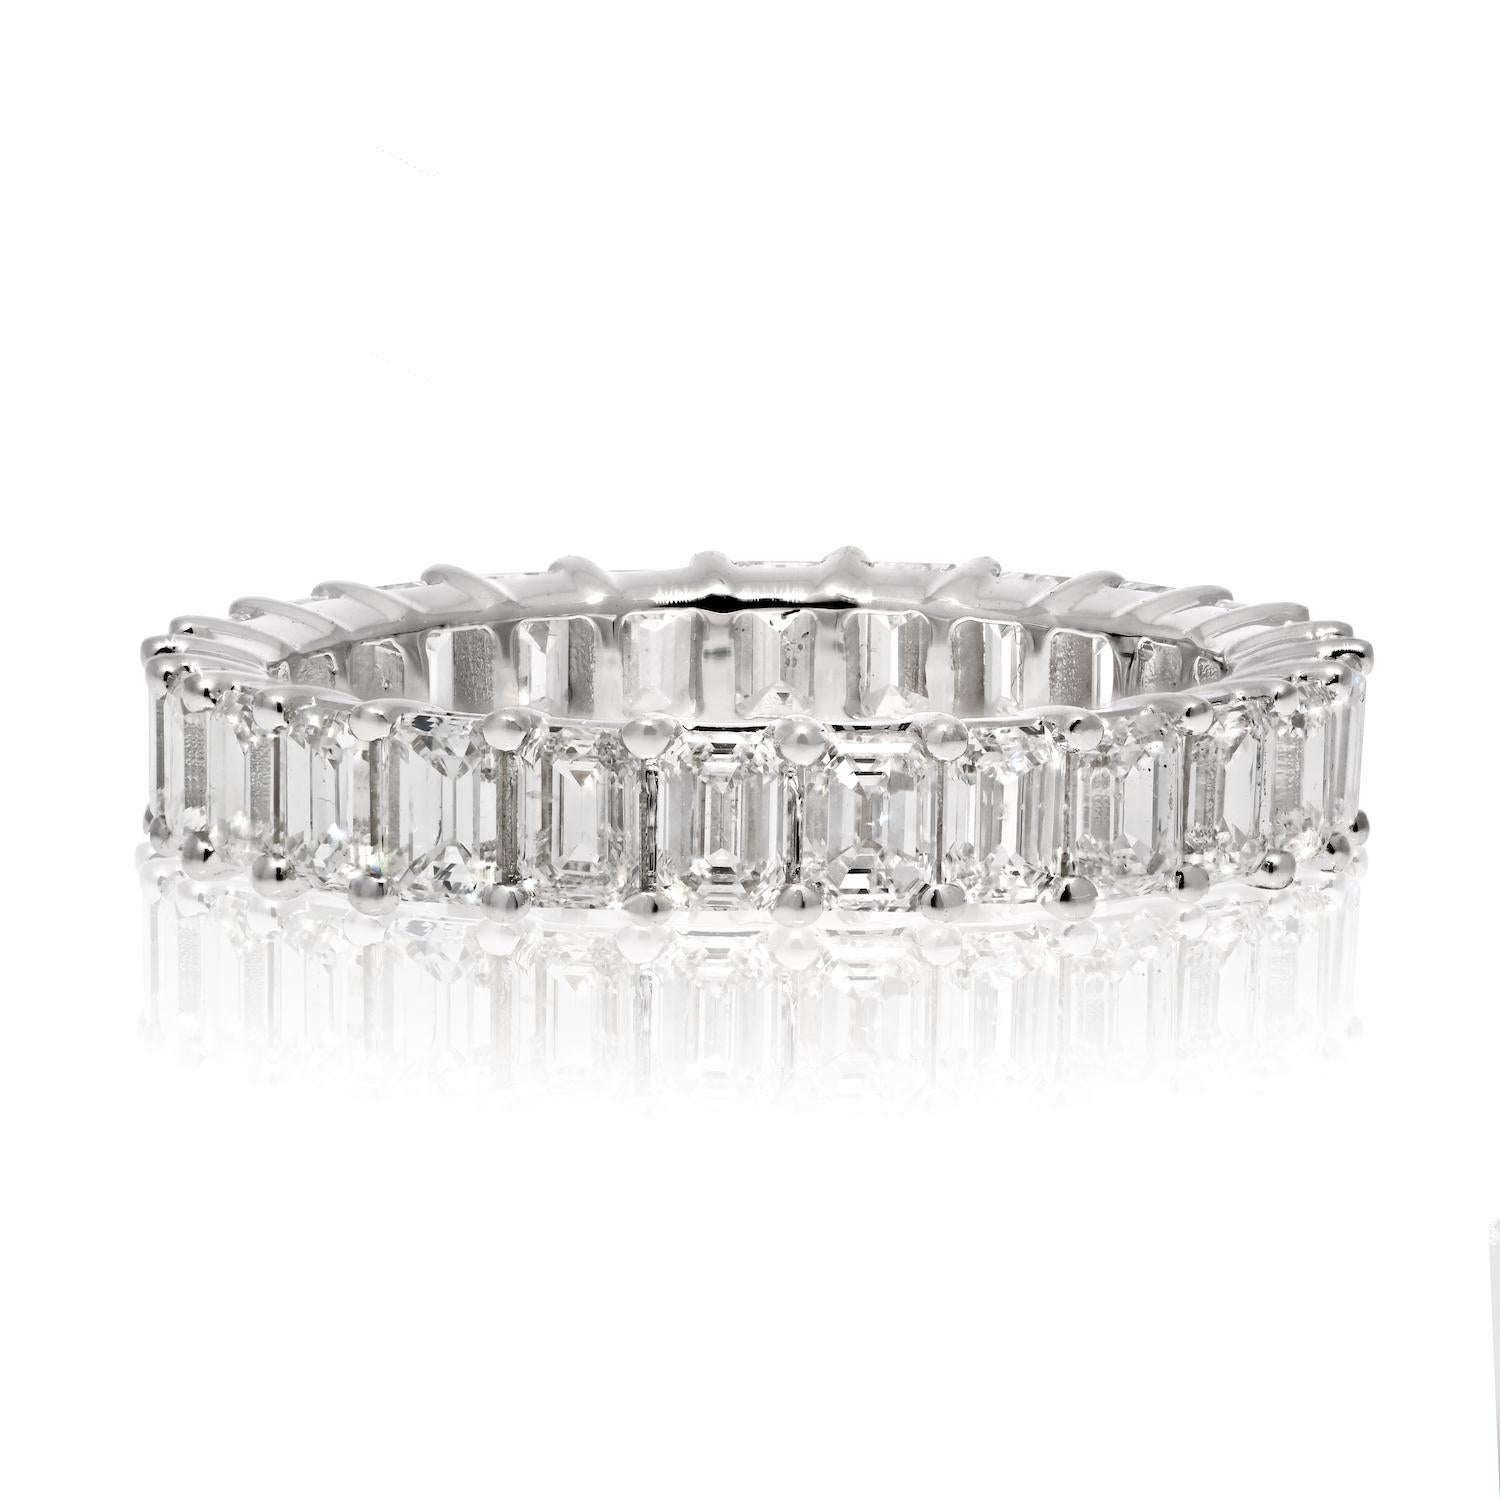 Step into a world of timeless elegance with this stunning 14K White Gold Emerald Cut Diamond Eternity Band. 

Exquisitely crafted, this eternity band features 26 emerald-cut diamonds, totaling an impressive 3.50 carats, beautifully aligned in an